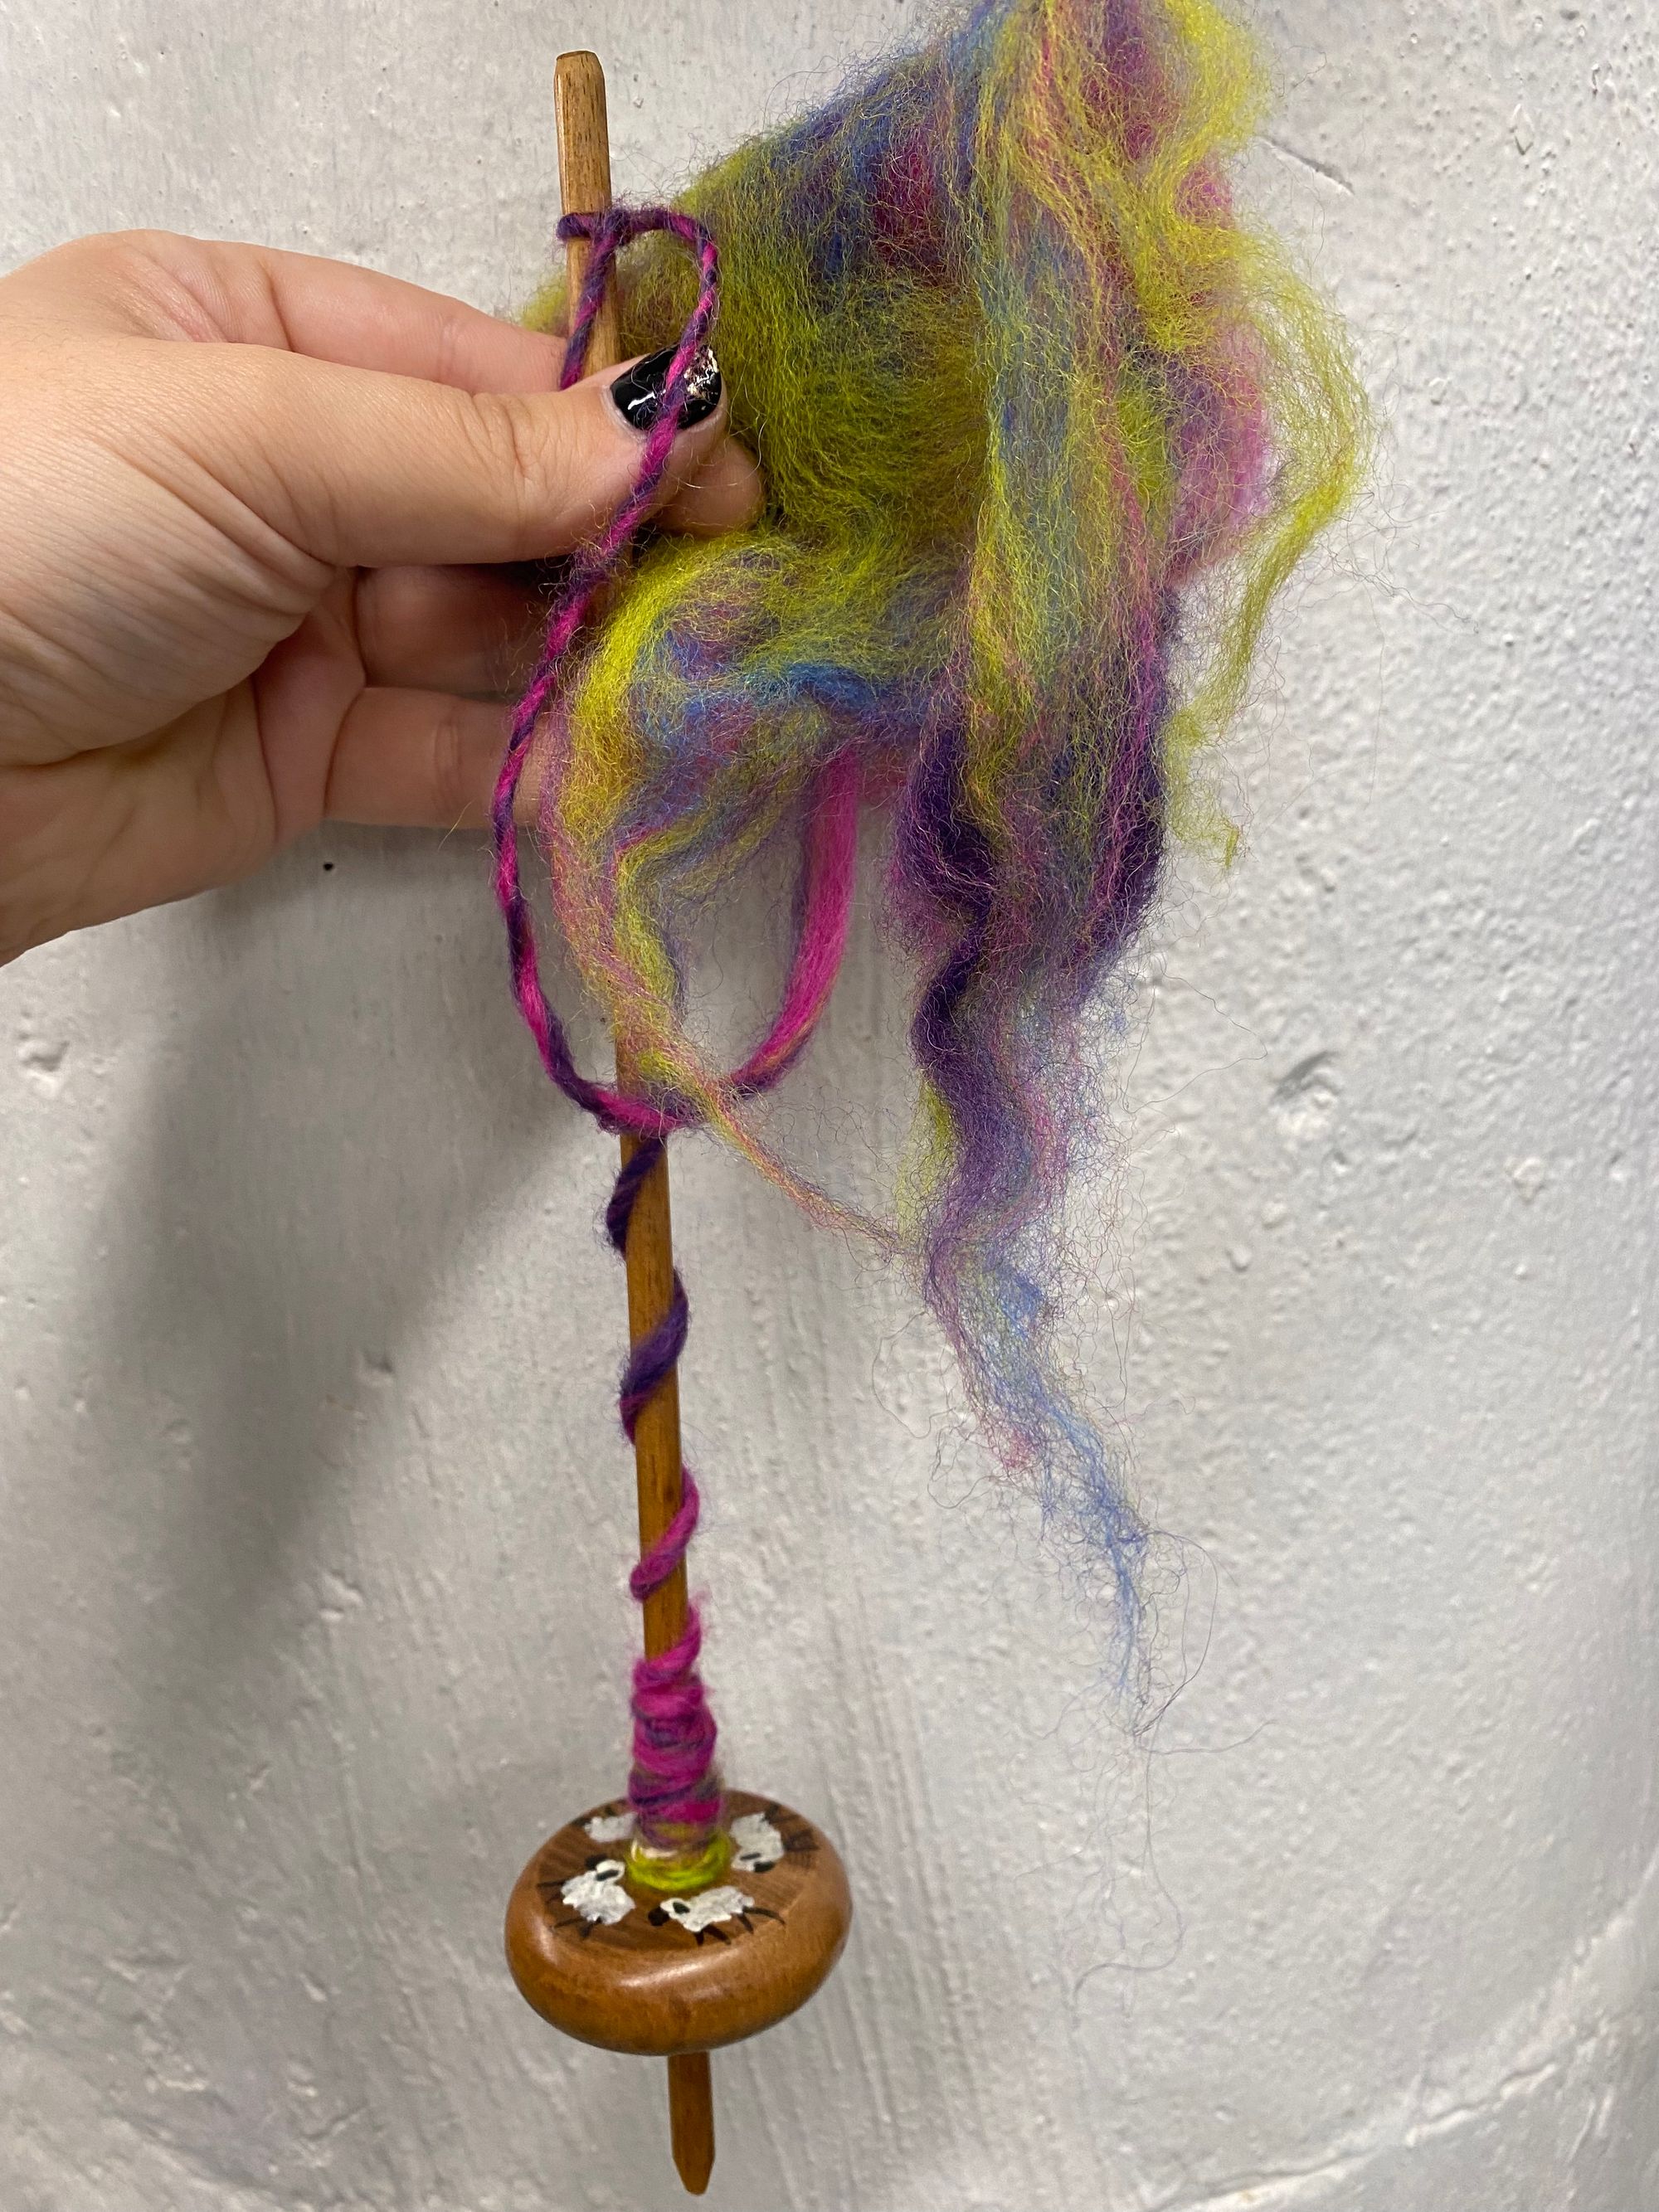 A drop spindle with little sheep painted on it held against a white, concrete surface with green, purple, and pink fibers coming off of it.